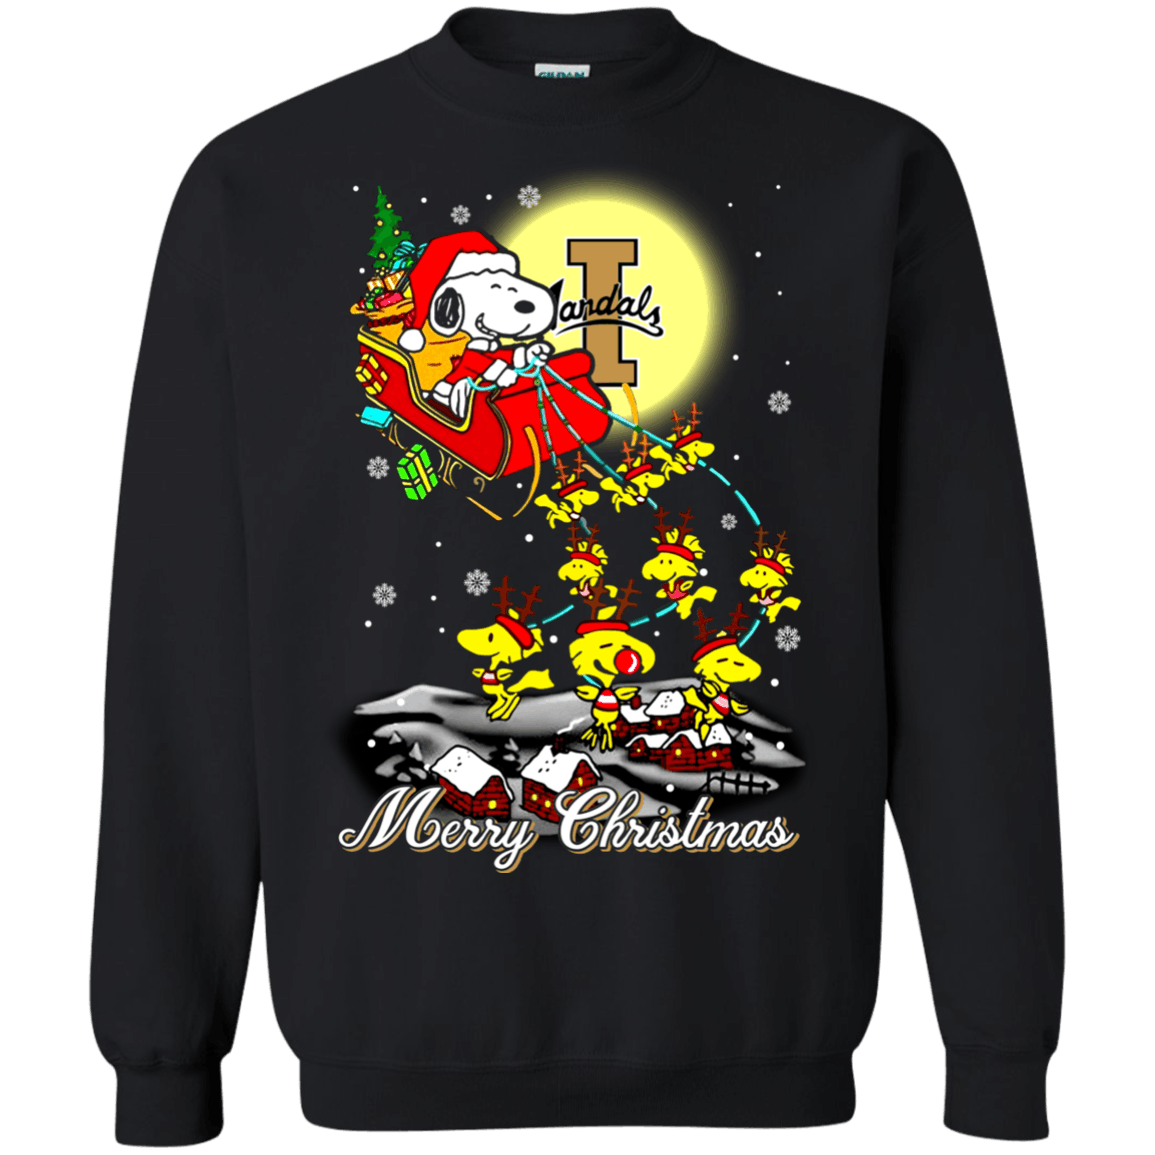 Amazing Shirt Idaho Vandals Ugly Christmas Sweater 2023S Santa Claus With Sleigh And Snoopy Sweatshirts